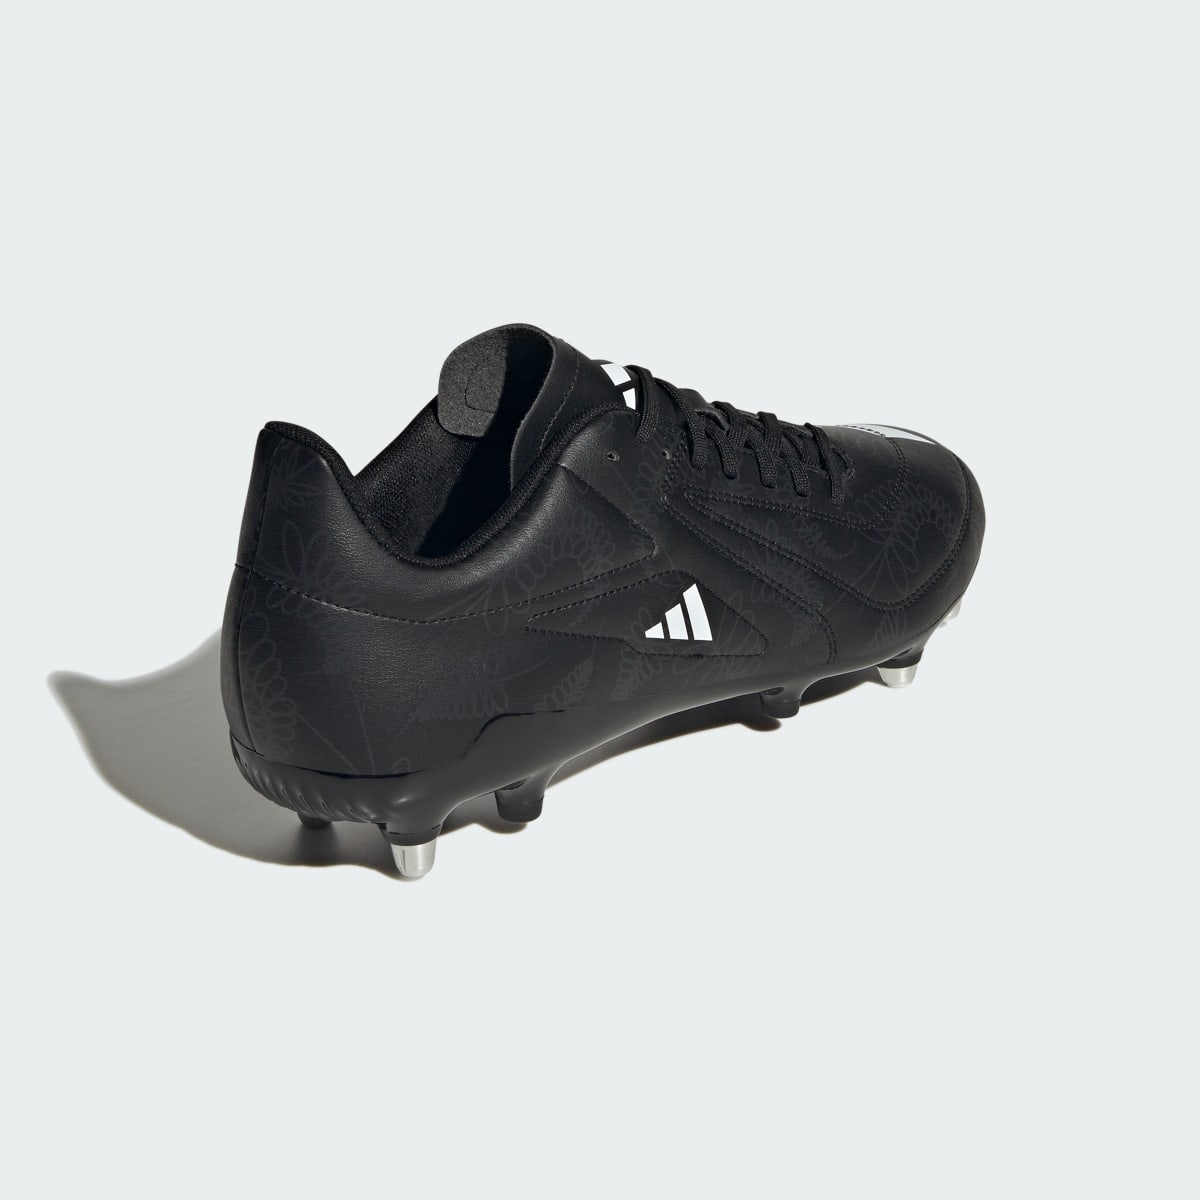 Adidas RS15 Soft Ground Rugby Boots. 6